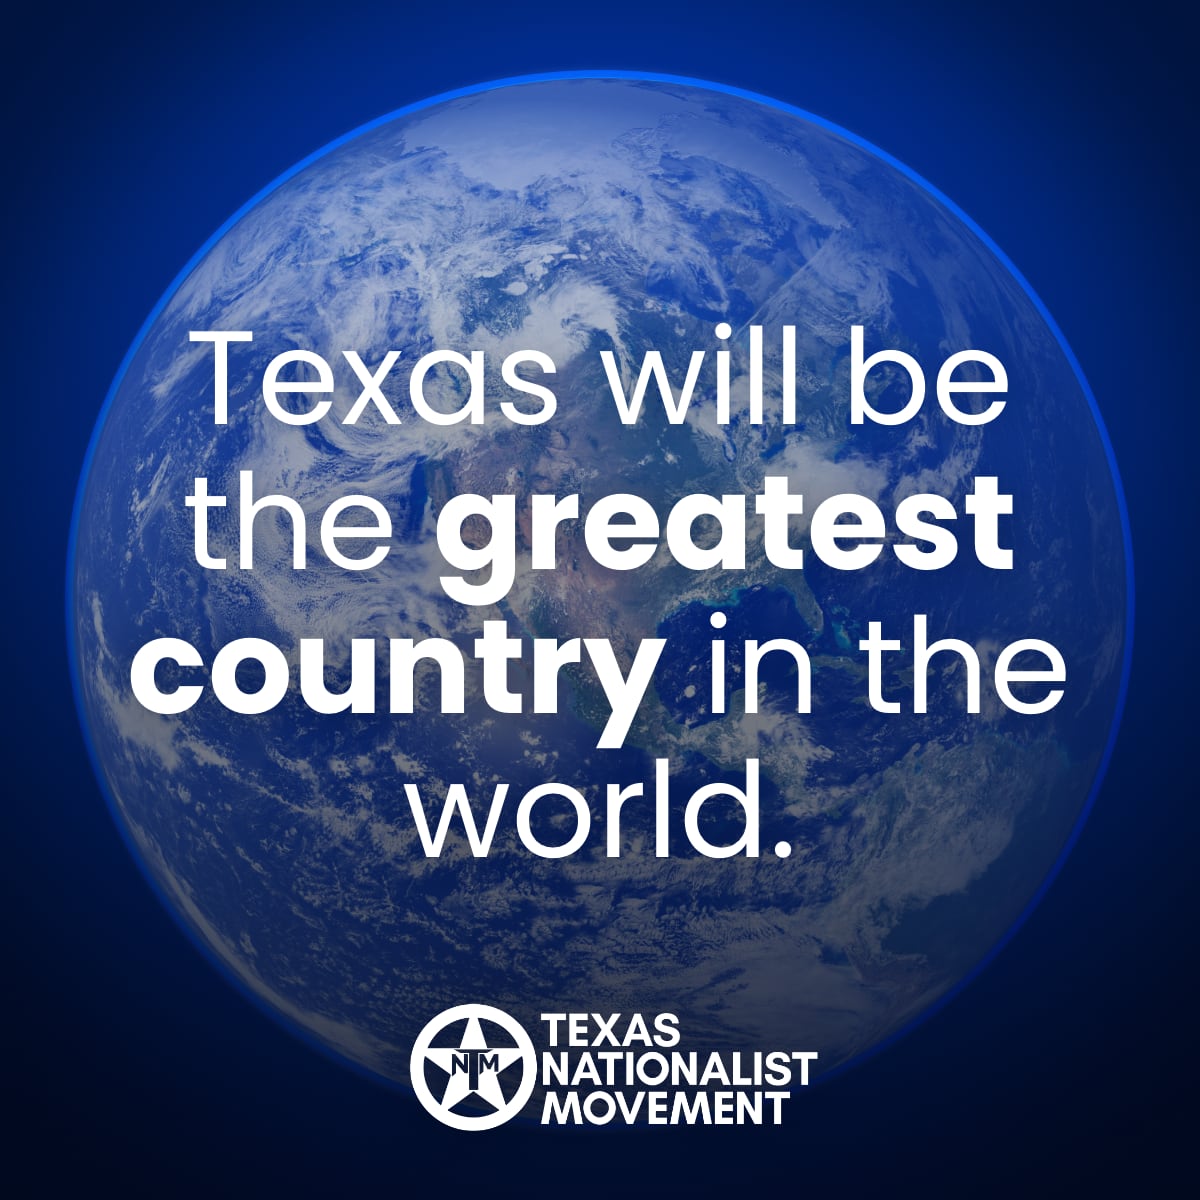 Who’s ready for Texas to stand on its own?